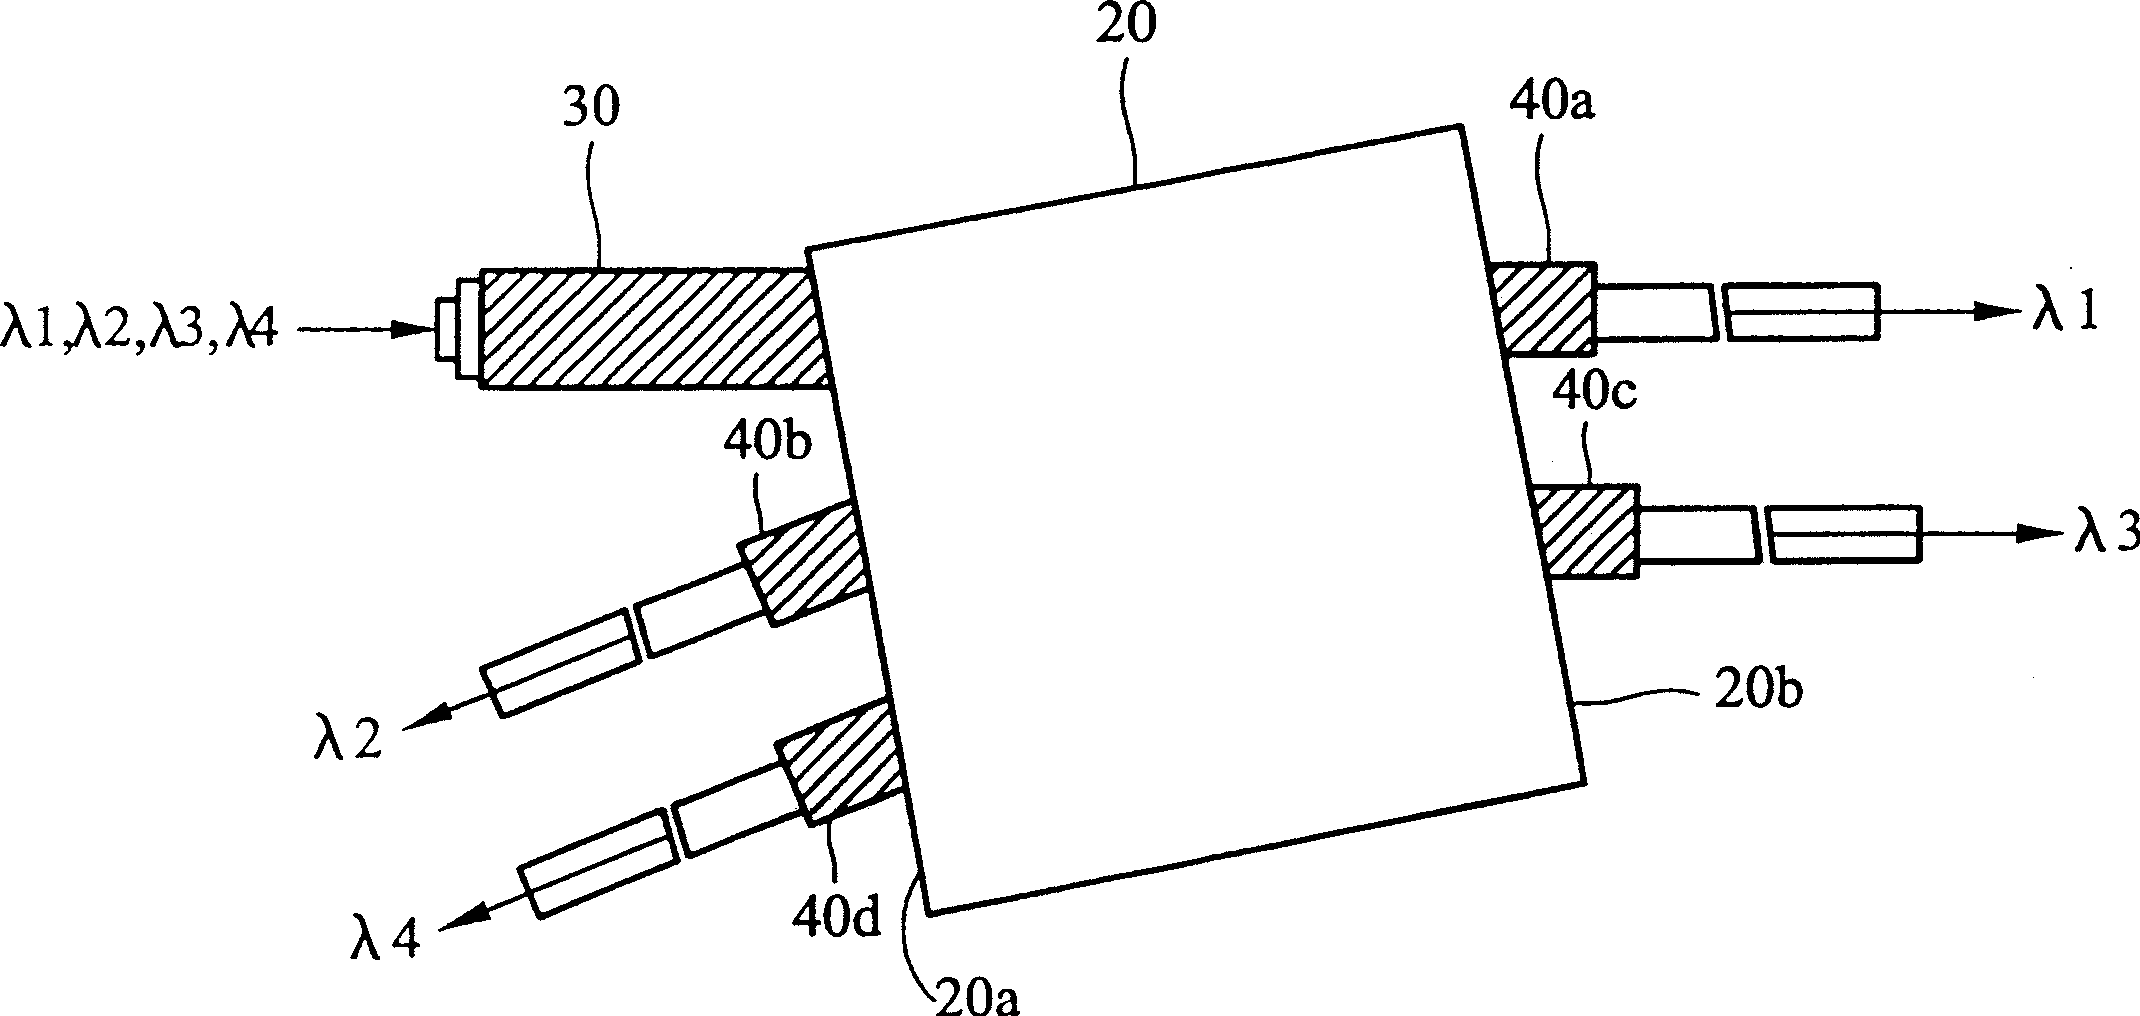 Z-shaped multiplexer for wavelength divisions